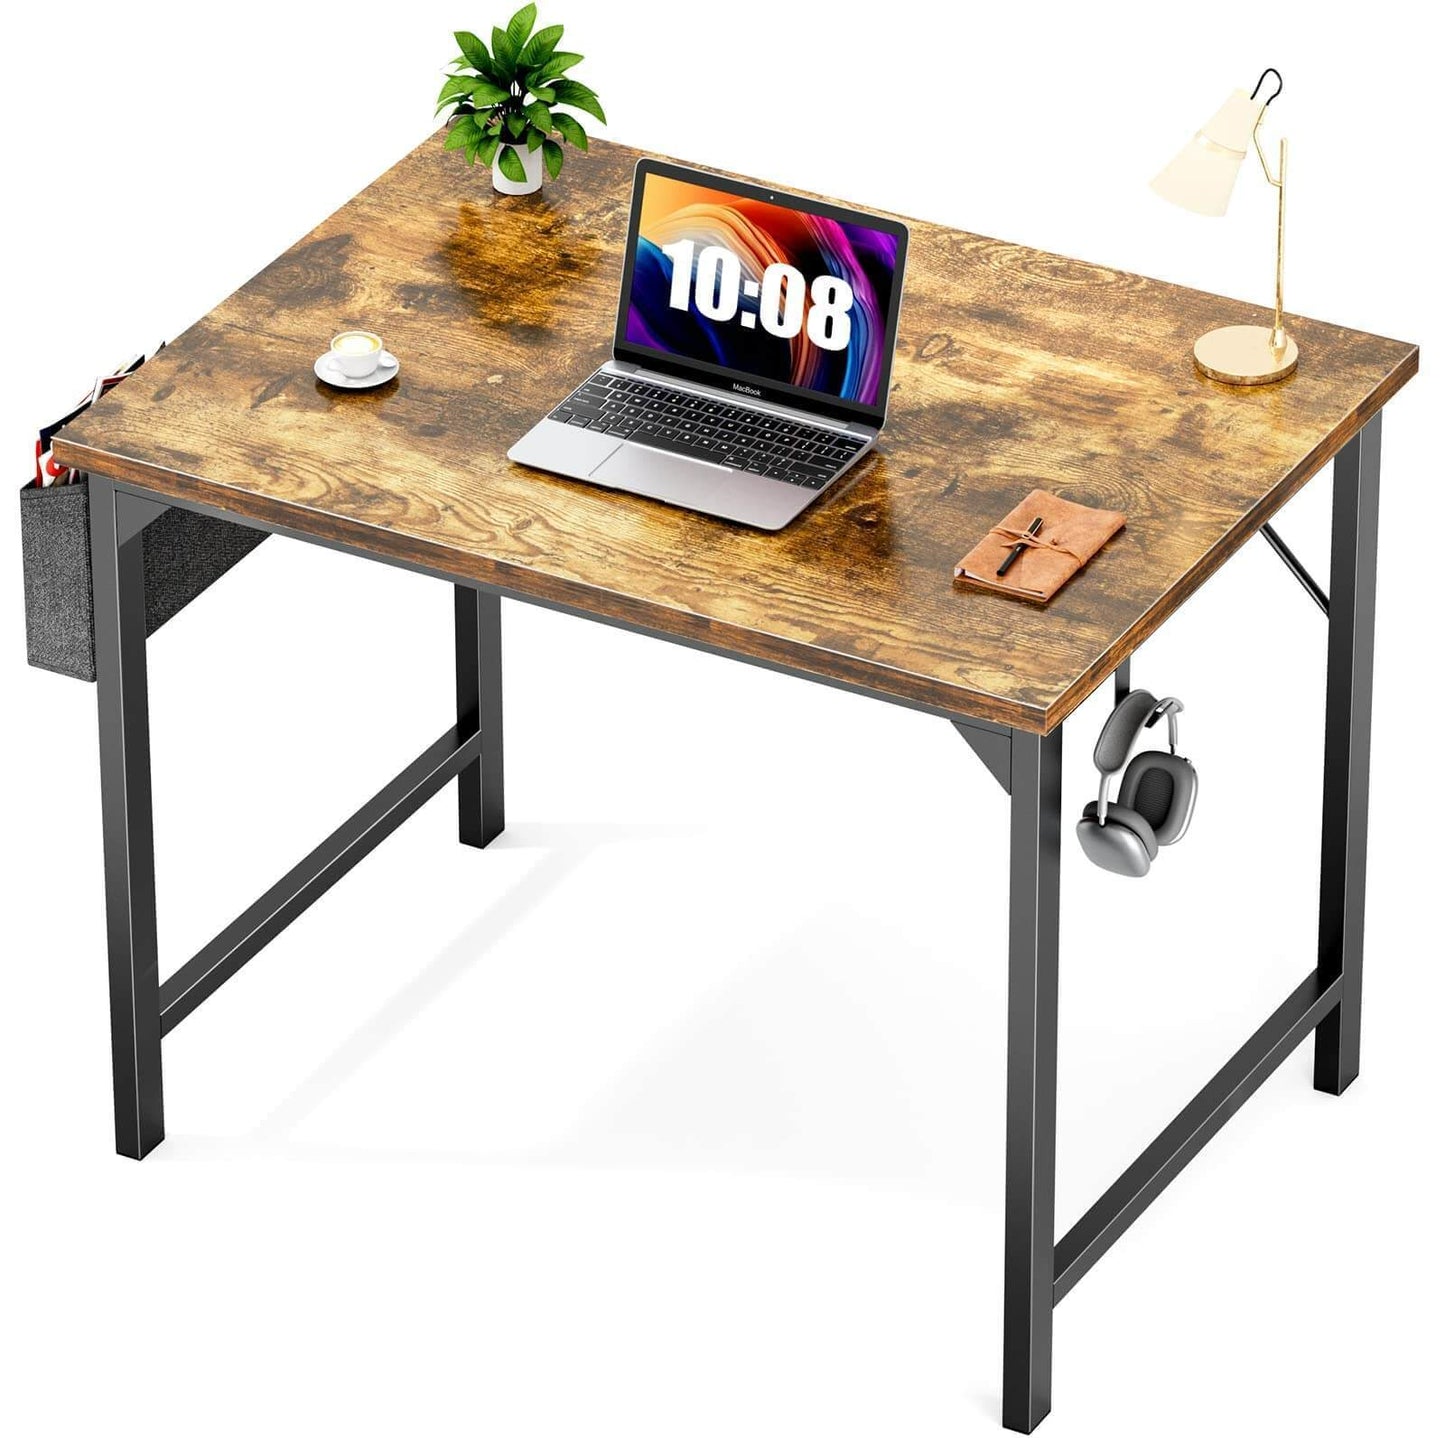 55-Inch Rustic Brown Wooden Desk with Storage for Home and Office